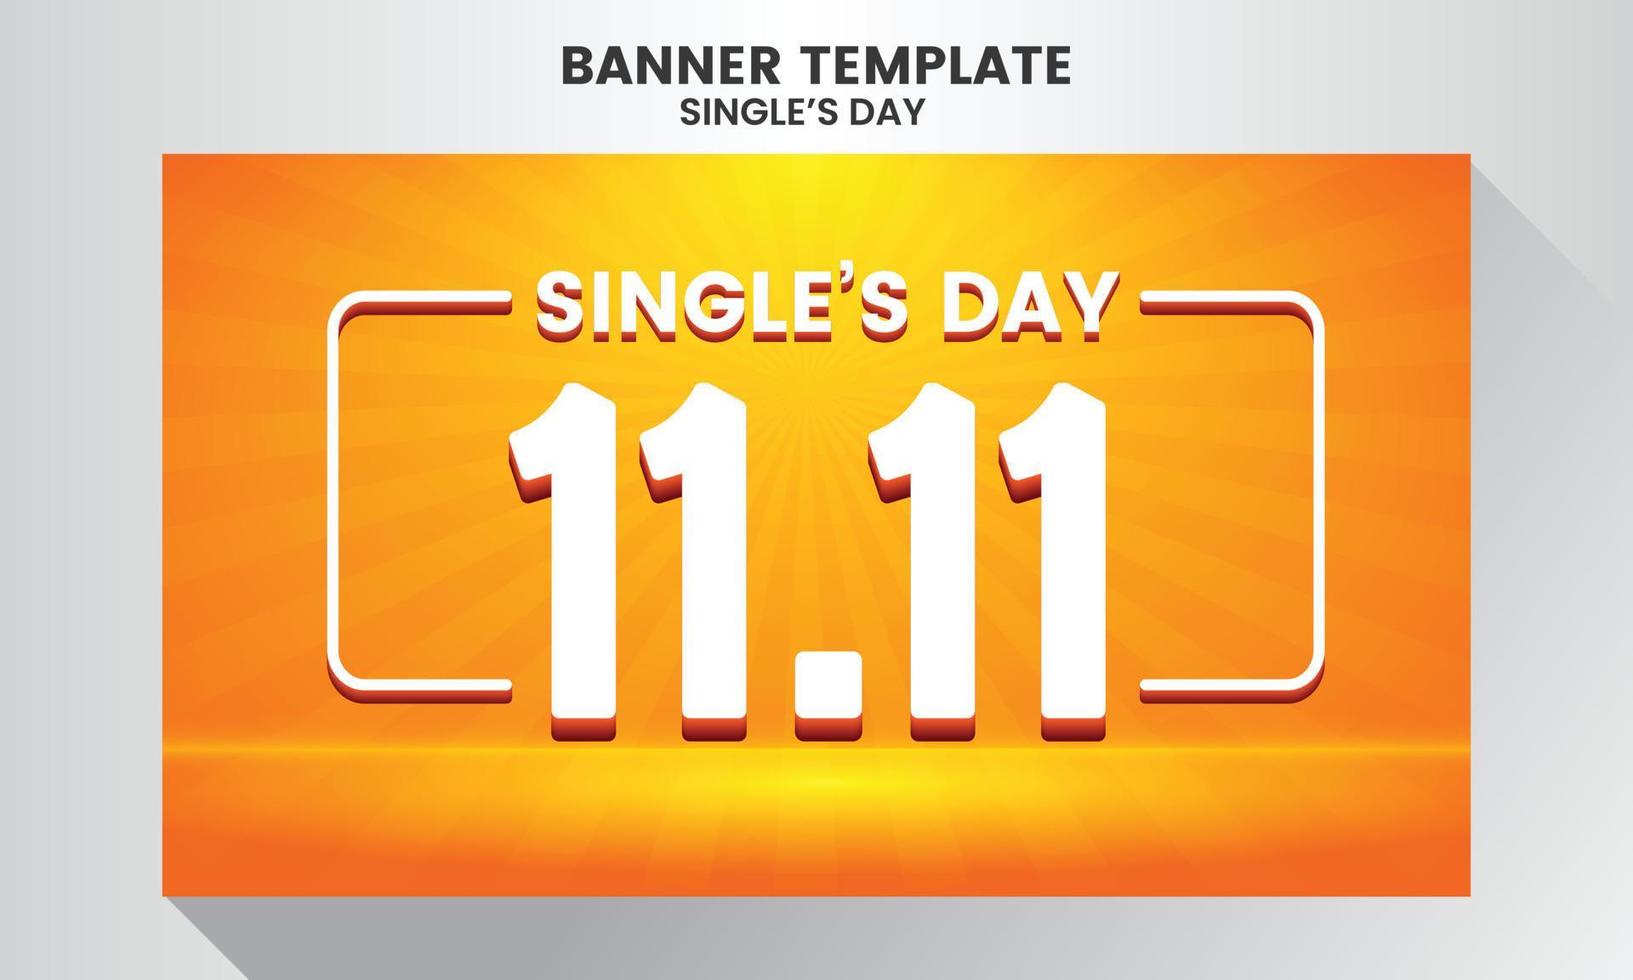 Realistic single's day sale illustration banner template with orange background vector